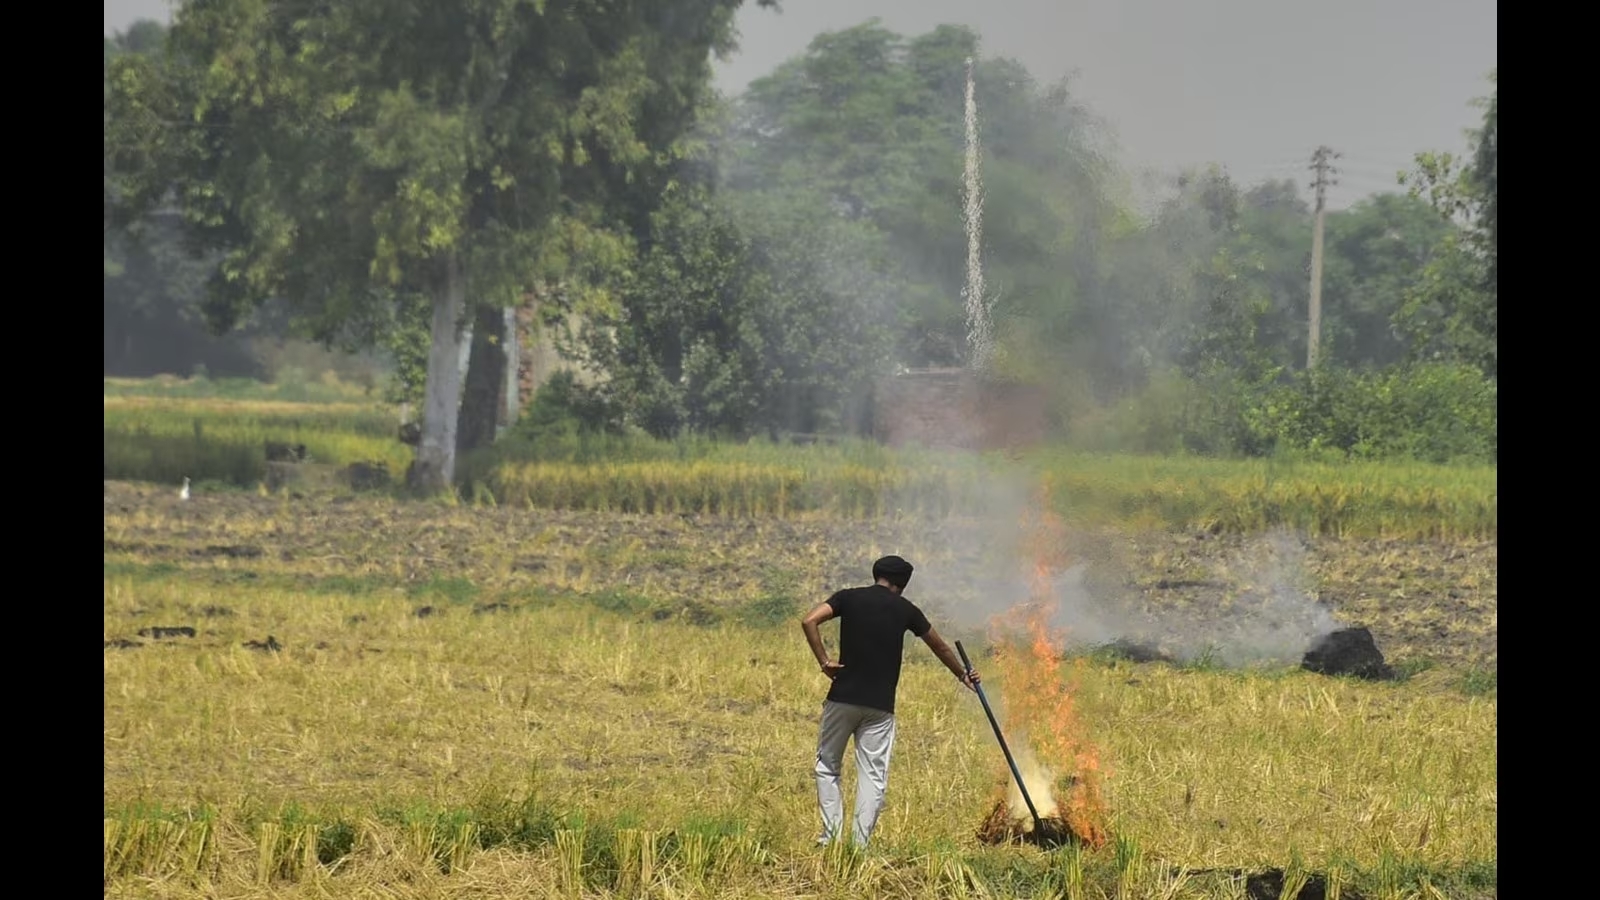 Supreme Court Issues Strong Rebuke to Punjab Over Stubble Burning, Urges Immediate Action